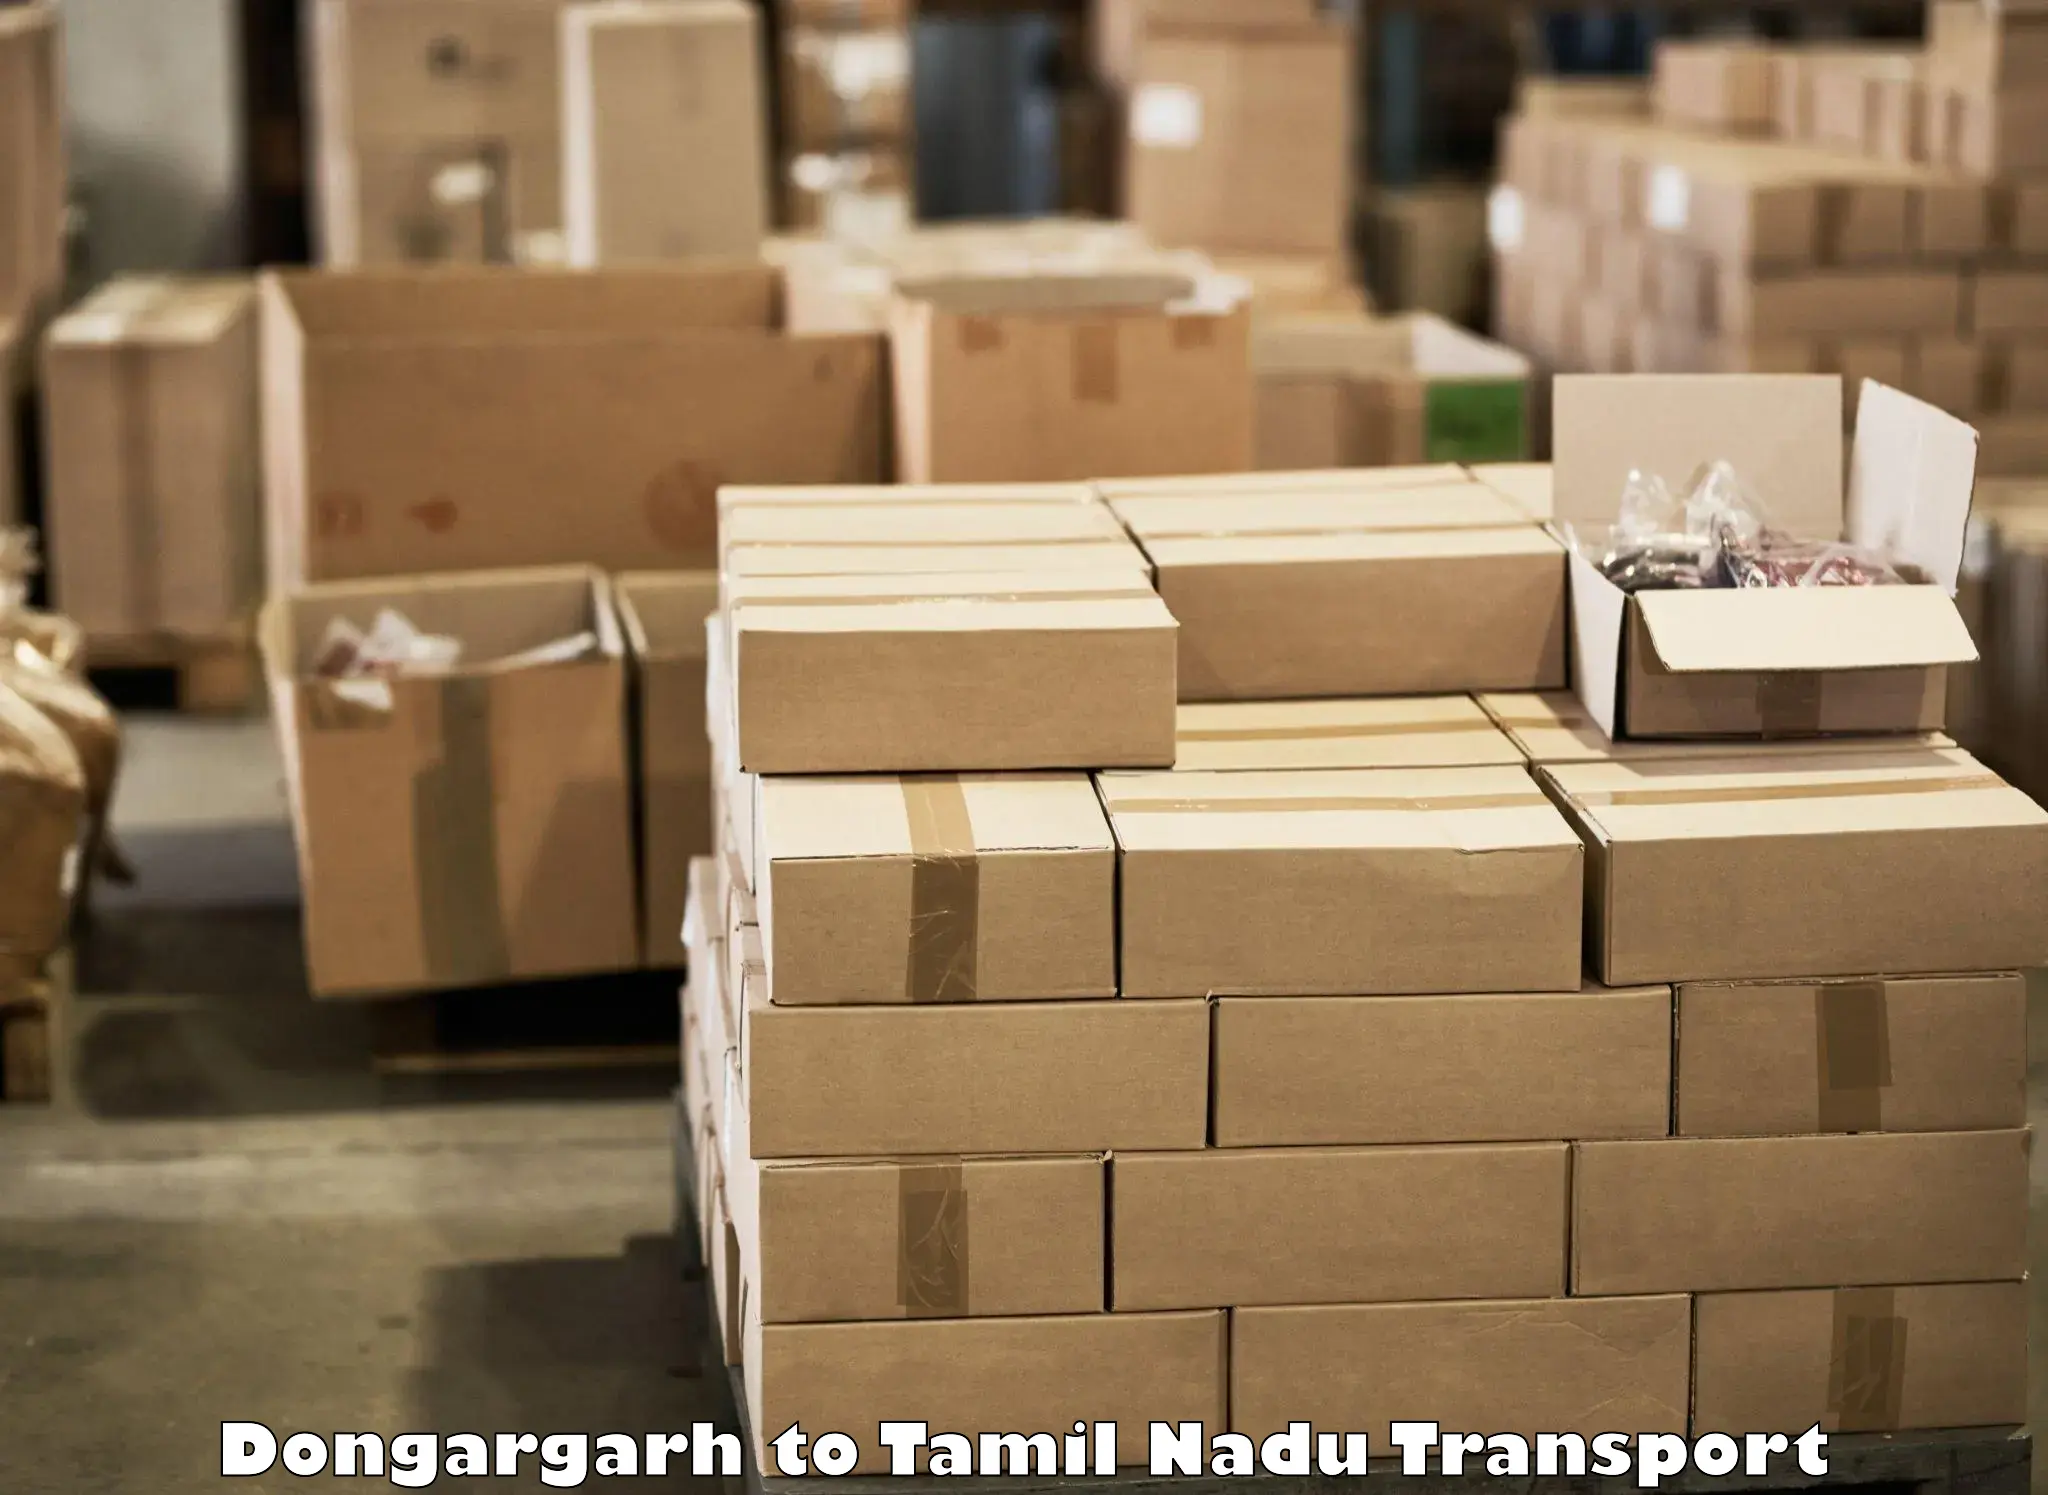 Nearby transport service Dongargarh to IIT Madras